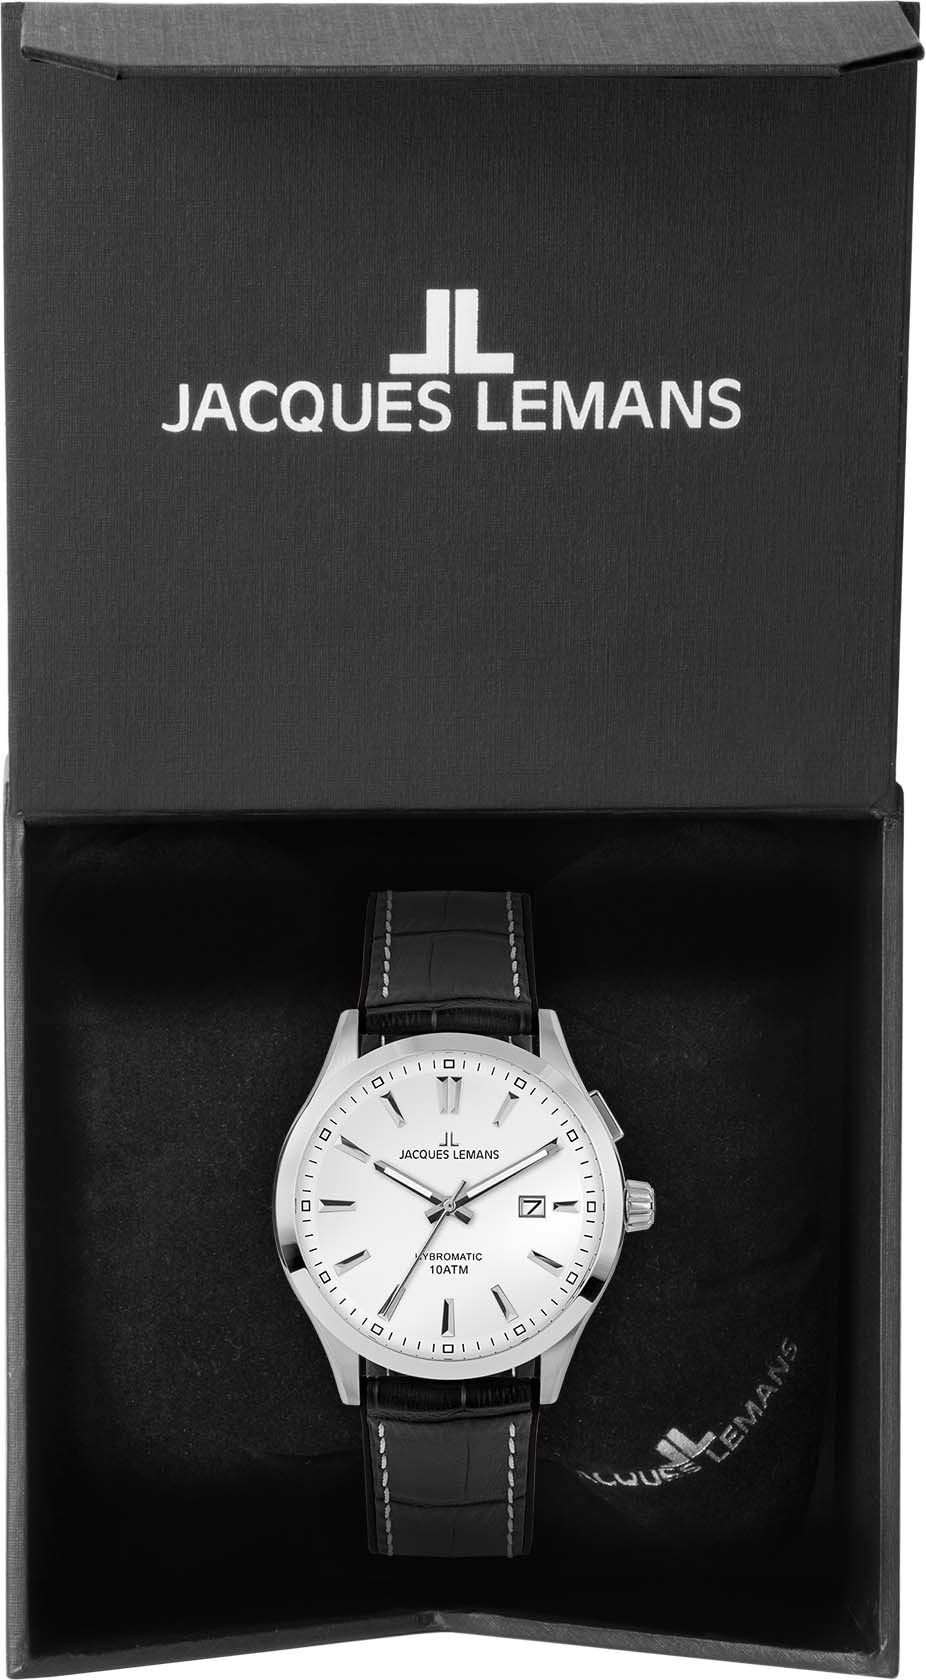 Jacques Lemans Kineticuhr bei ♕ »Hybromatic, 1-2130B«